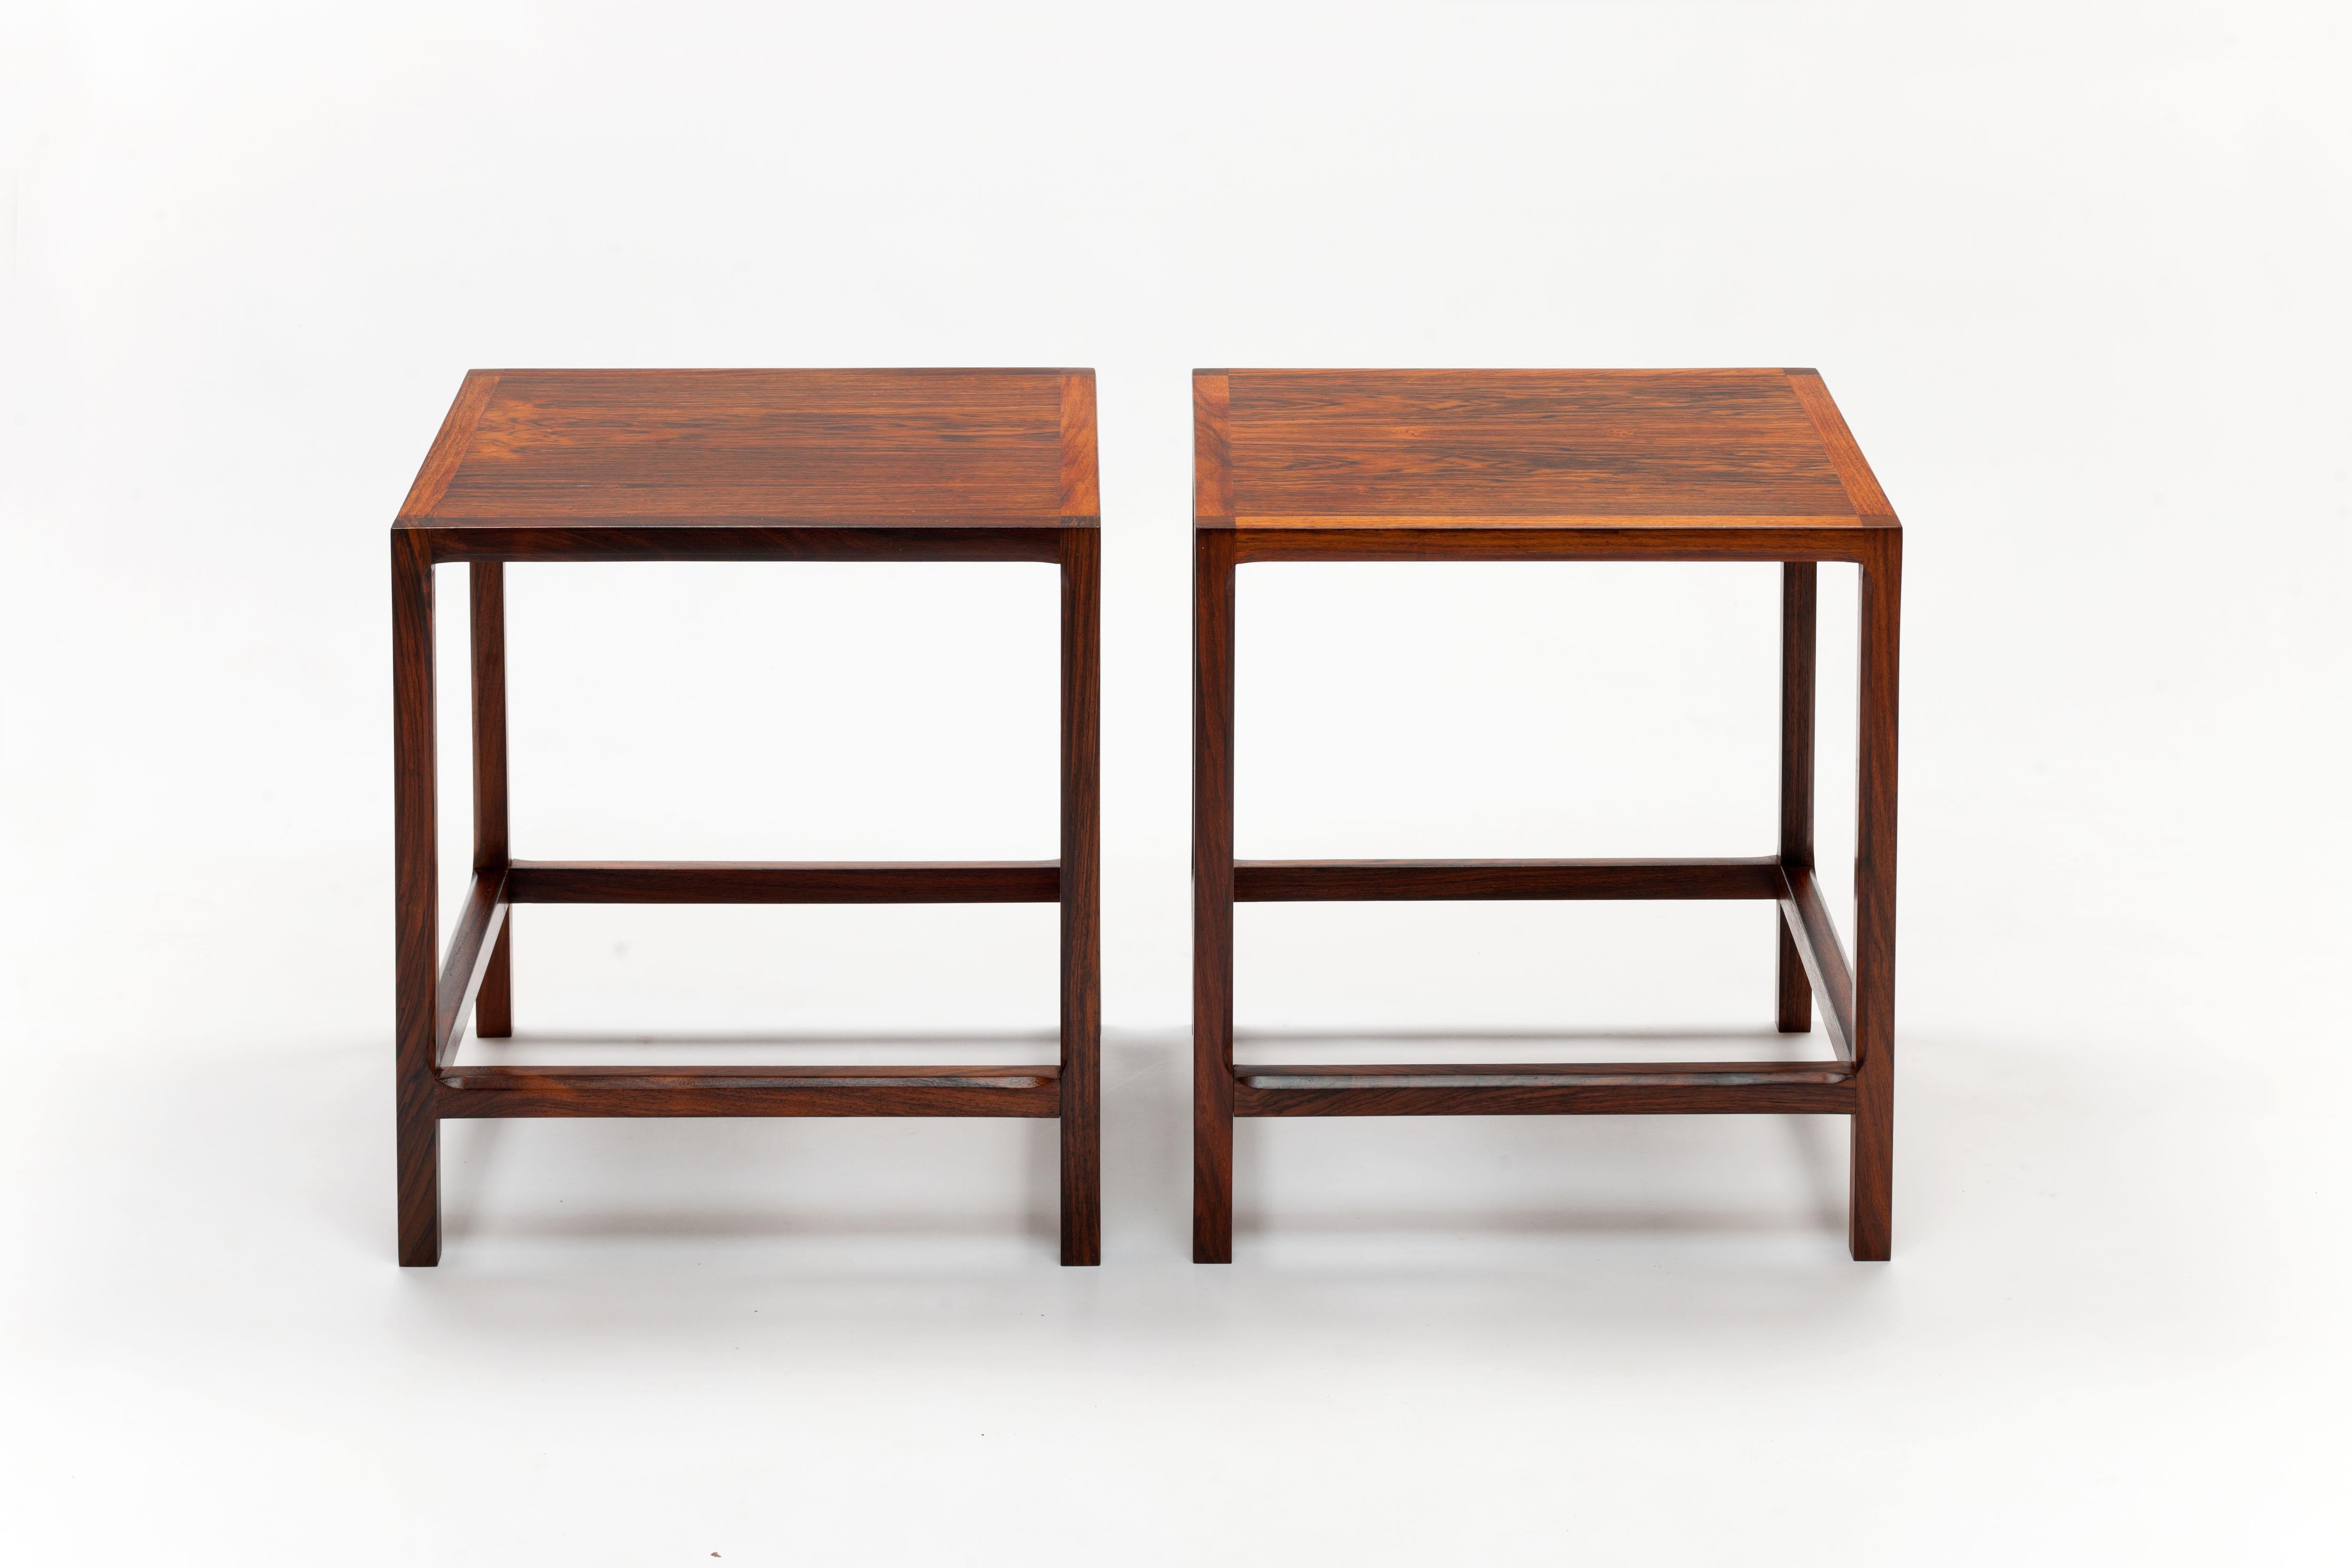 High end rosewood tables by Danish designer Kai Kristiansen executed by Aksel Kjersgaard carpentery Denmark, early 1960s.
These tables are of distinctive quality due to the use of solid rosewood.
The design is characterized by the subtle slanting